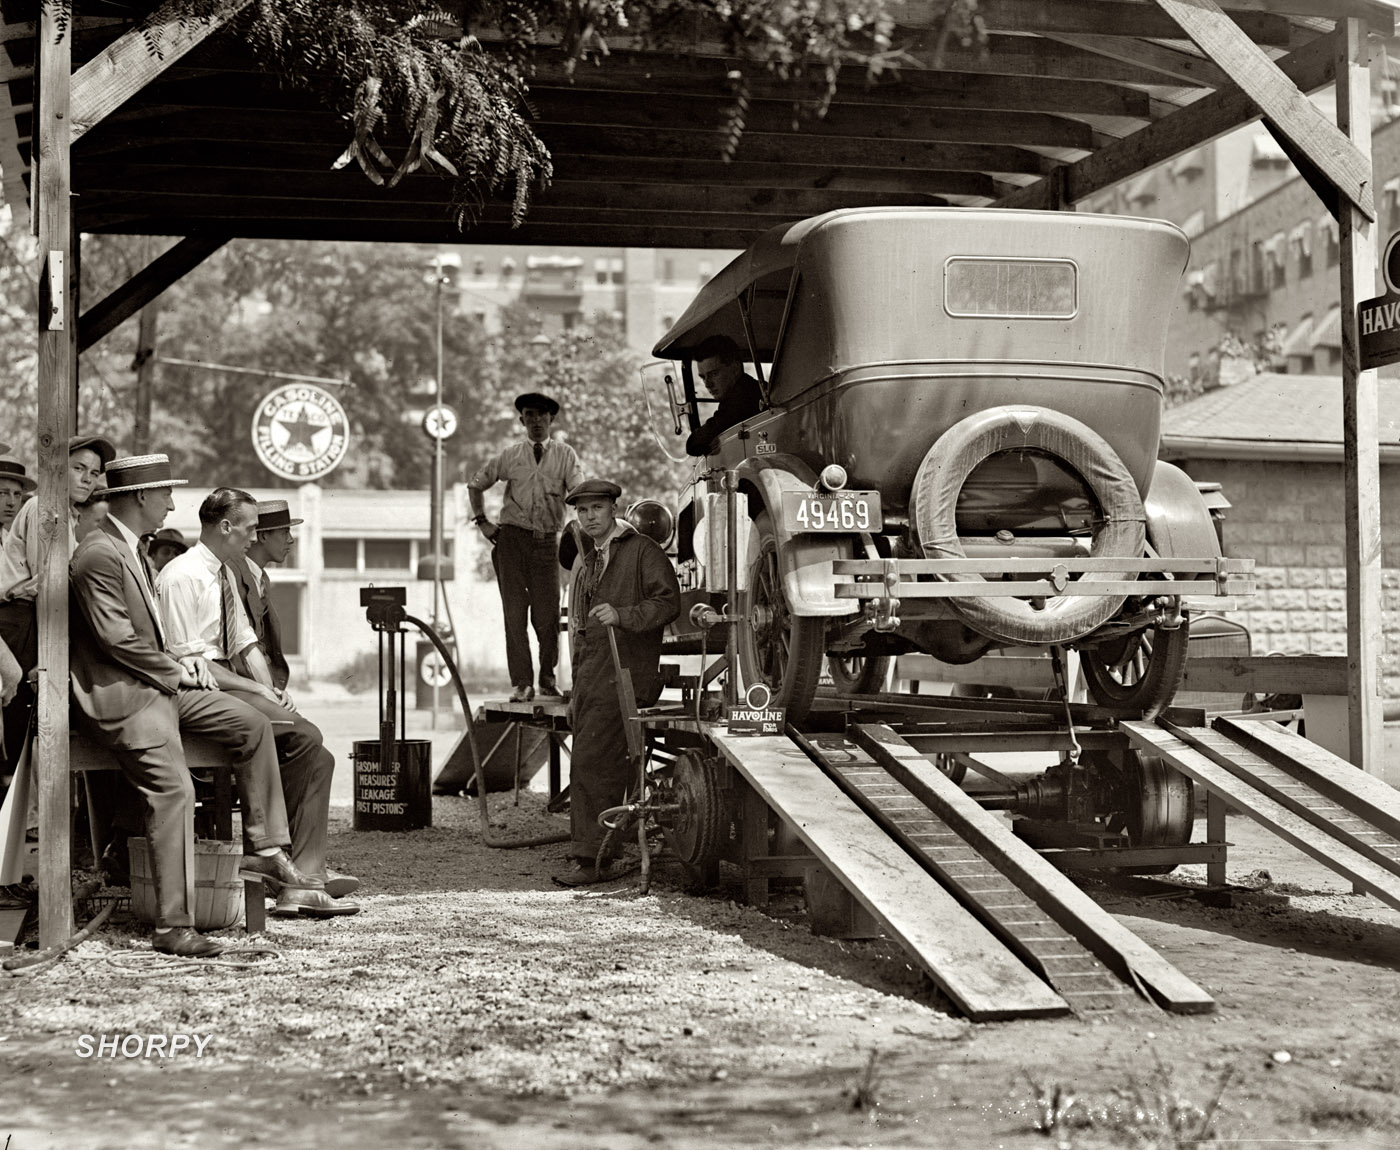 Washington, D.C., 1924. "Havoline Oil Company." View full size. National Photo Company Collection glass negative, Library of Congress.